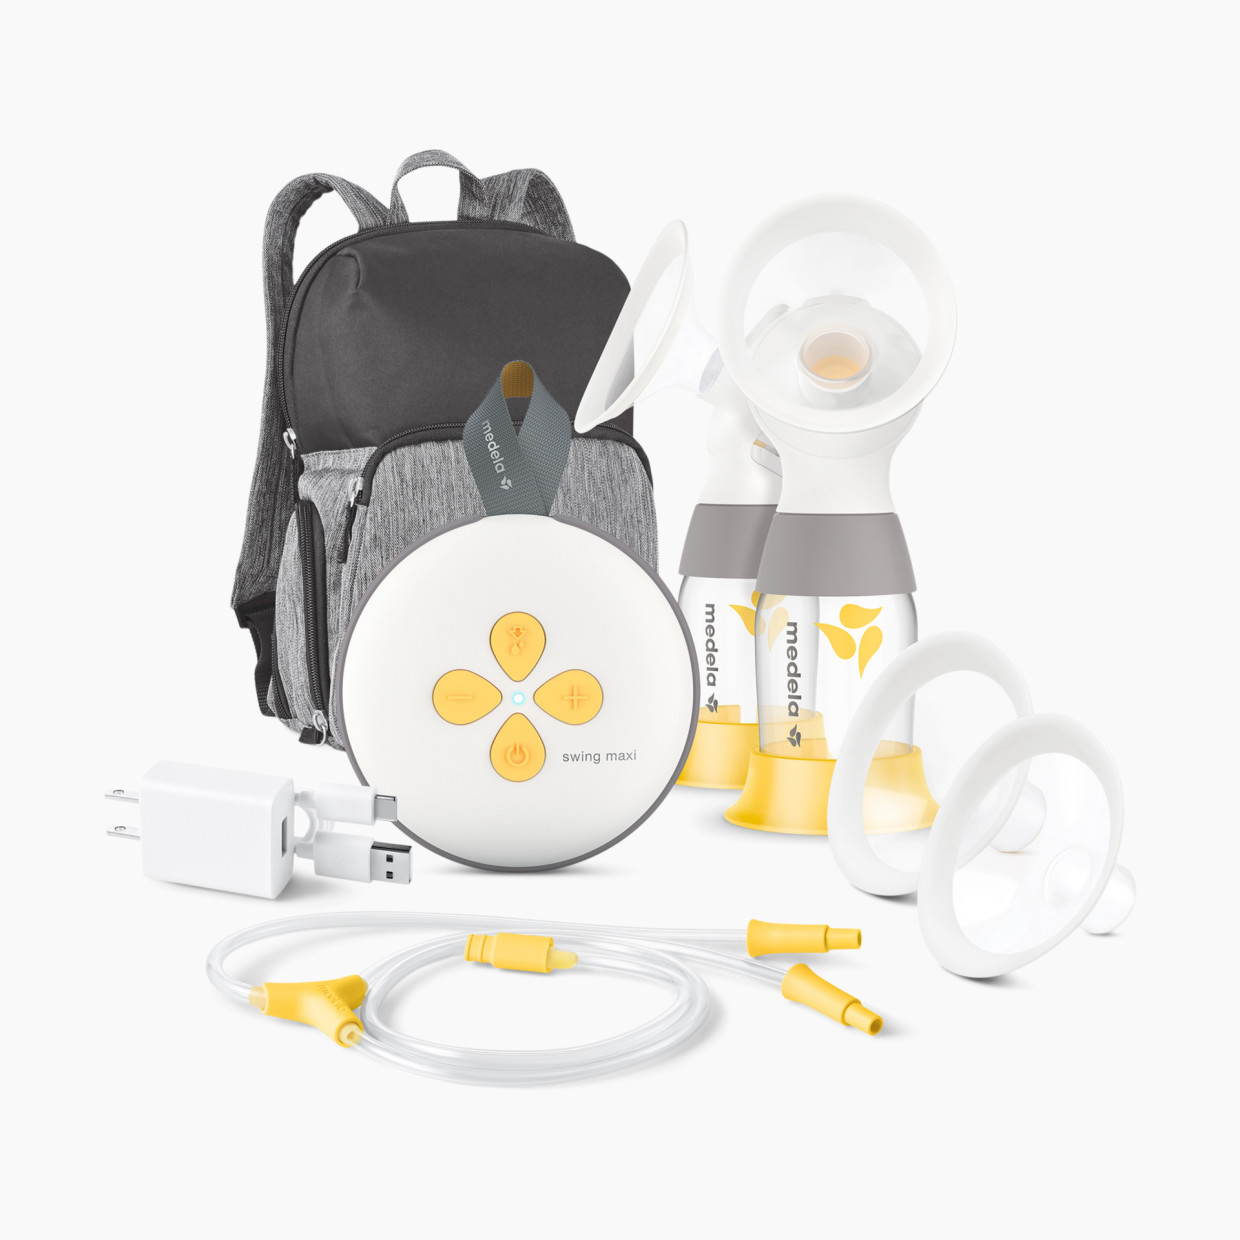 Medela Swing Maxi Double Electric Breast Pump with Bag and Accessories